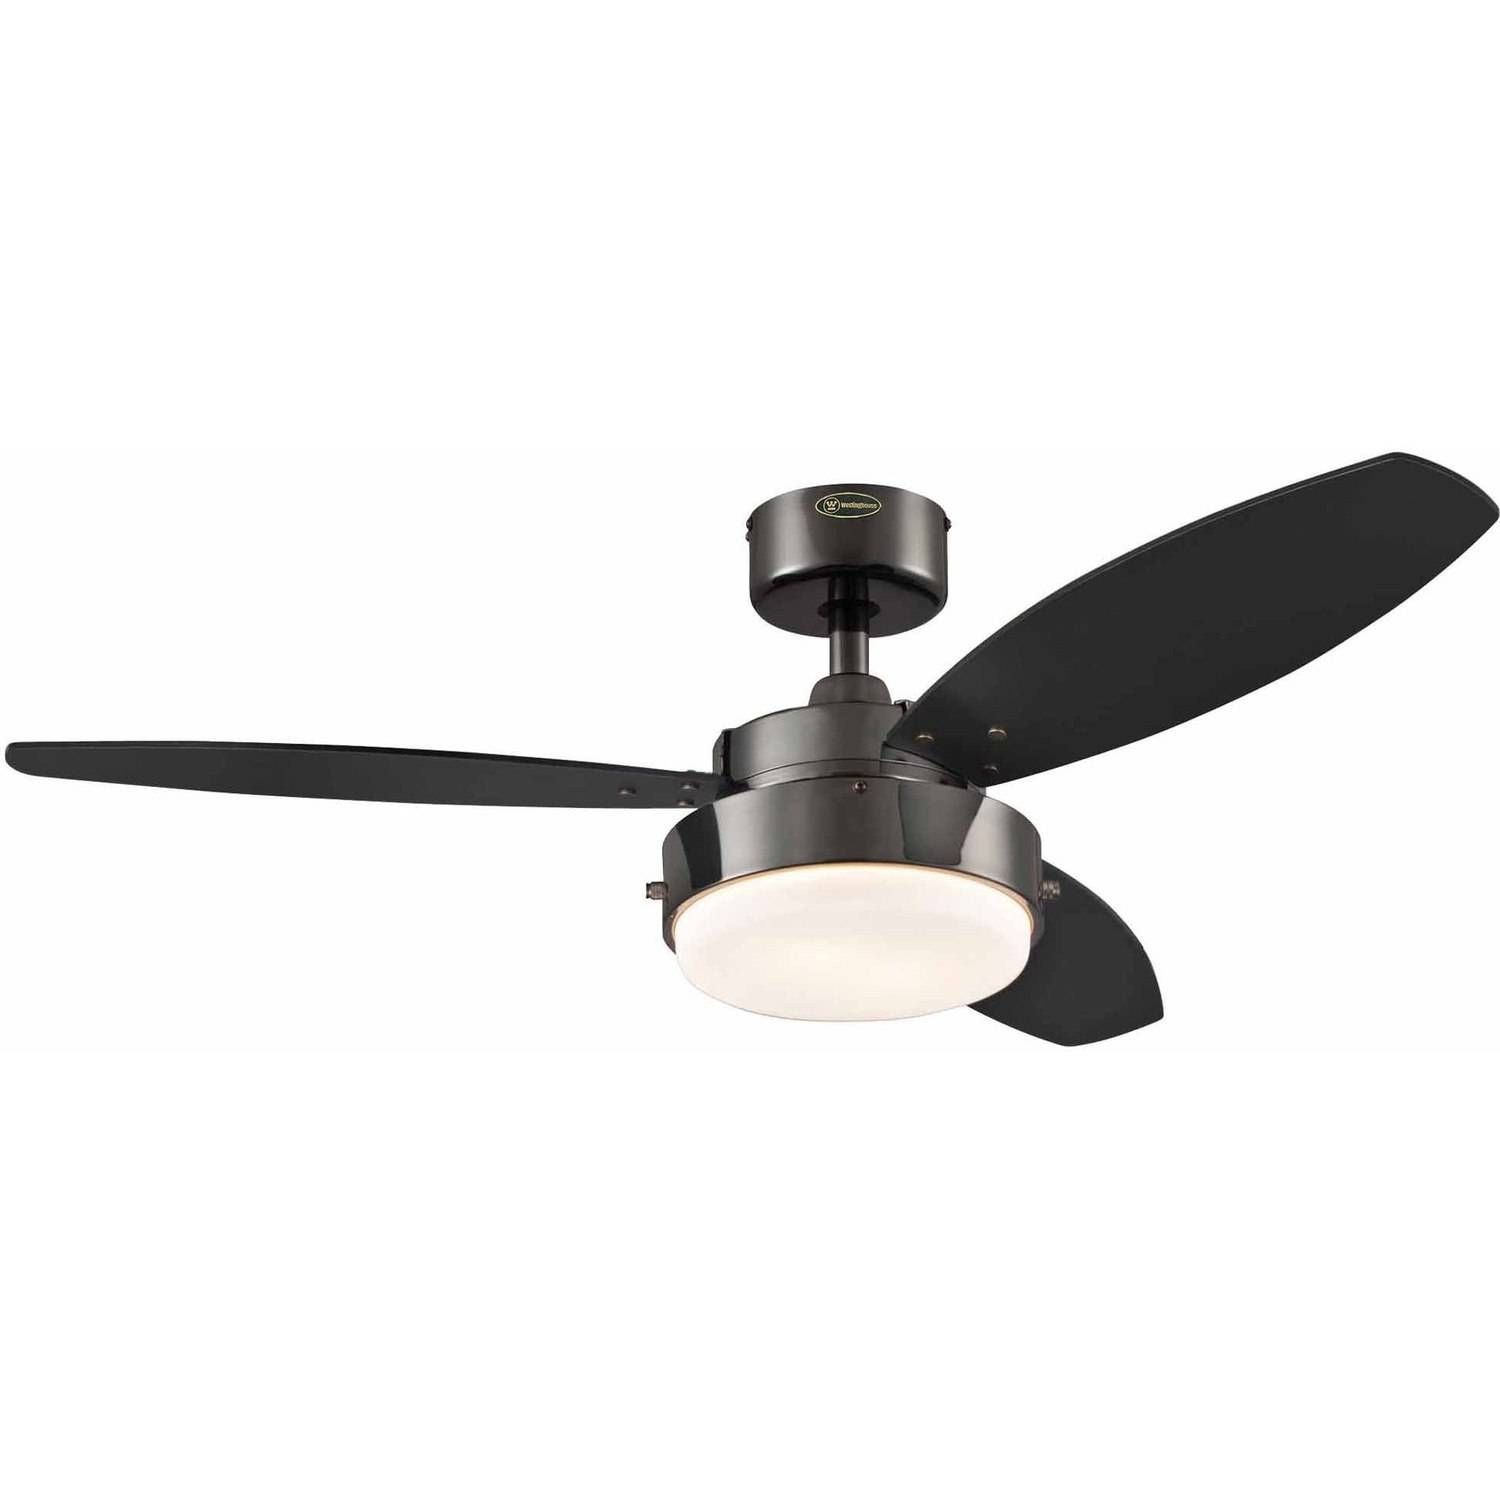 Ceiling Fan: Outstanding Black Outdoor Ceiling Fans With Lights Intended For Outdoor Ceiling Fans With Remote Control Lights (View 12 of 15)